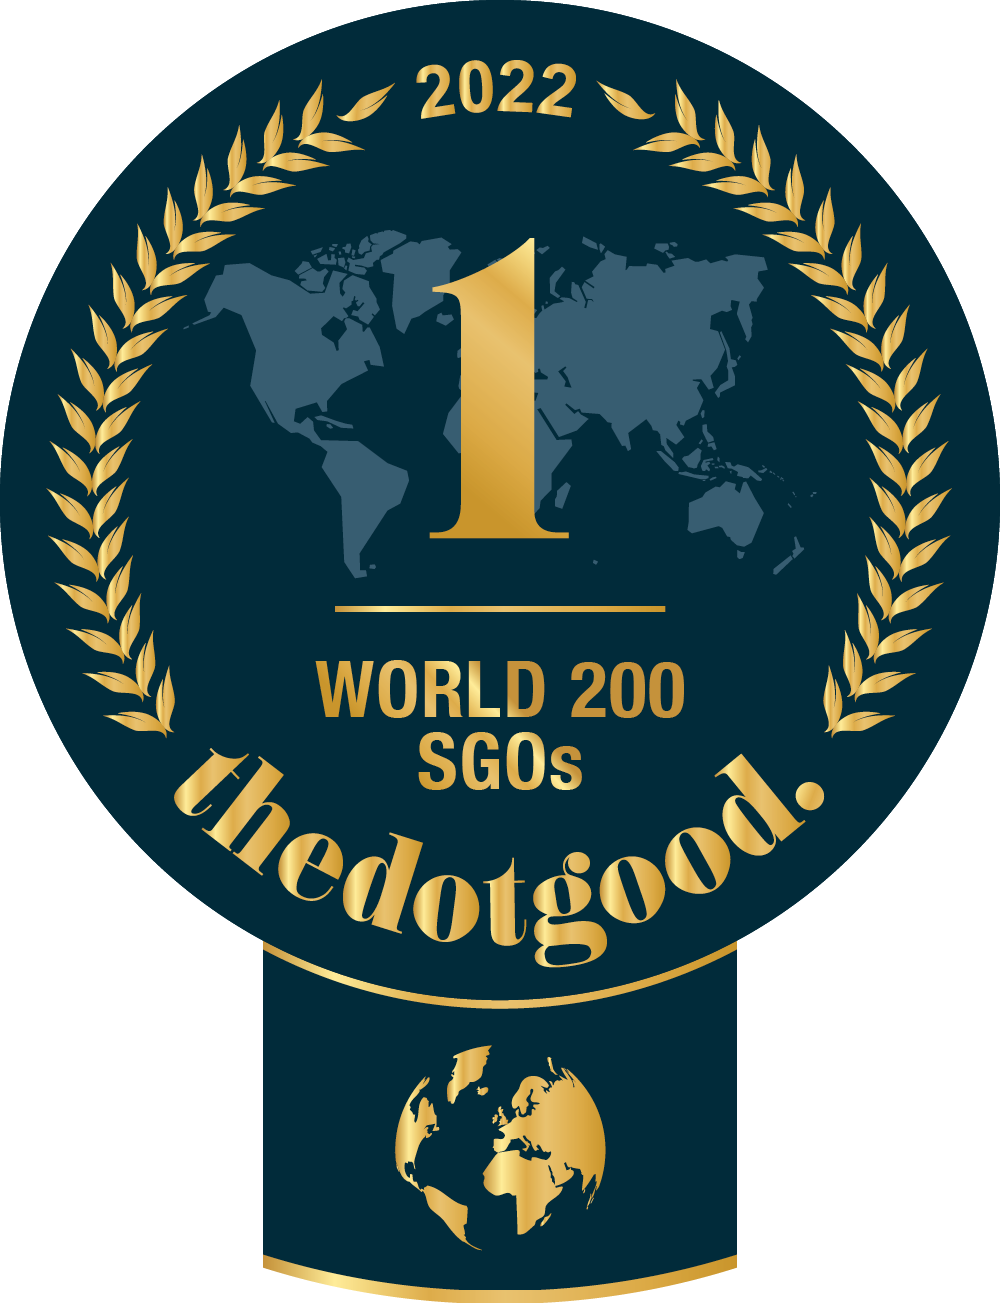 BRAC is world ranked on thedotgood.